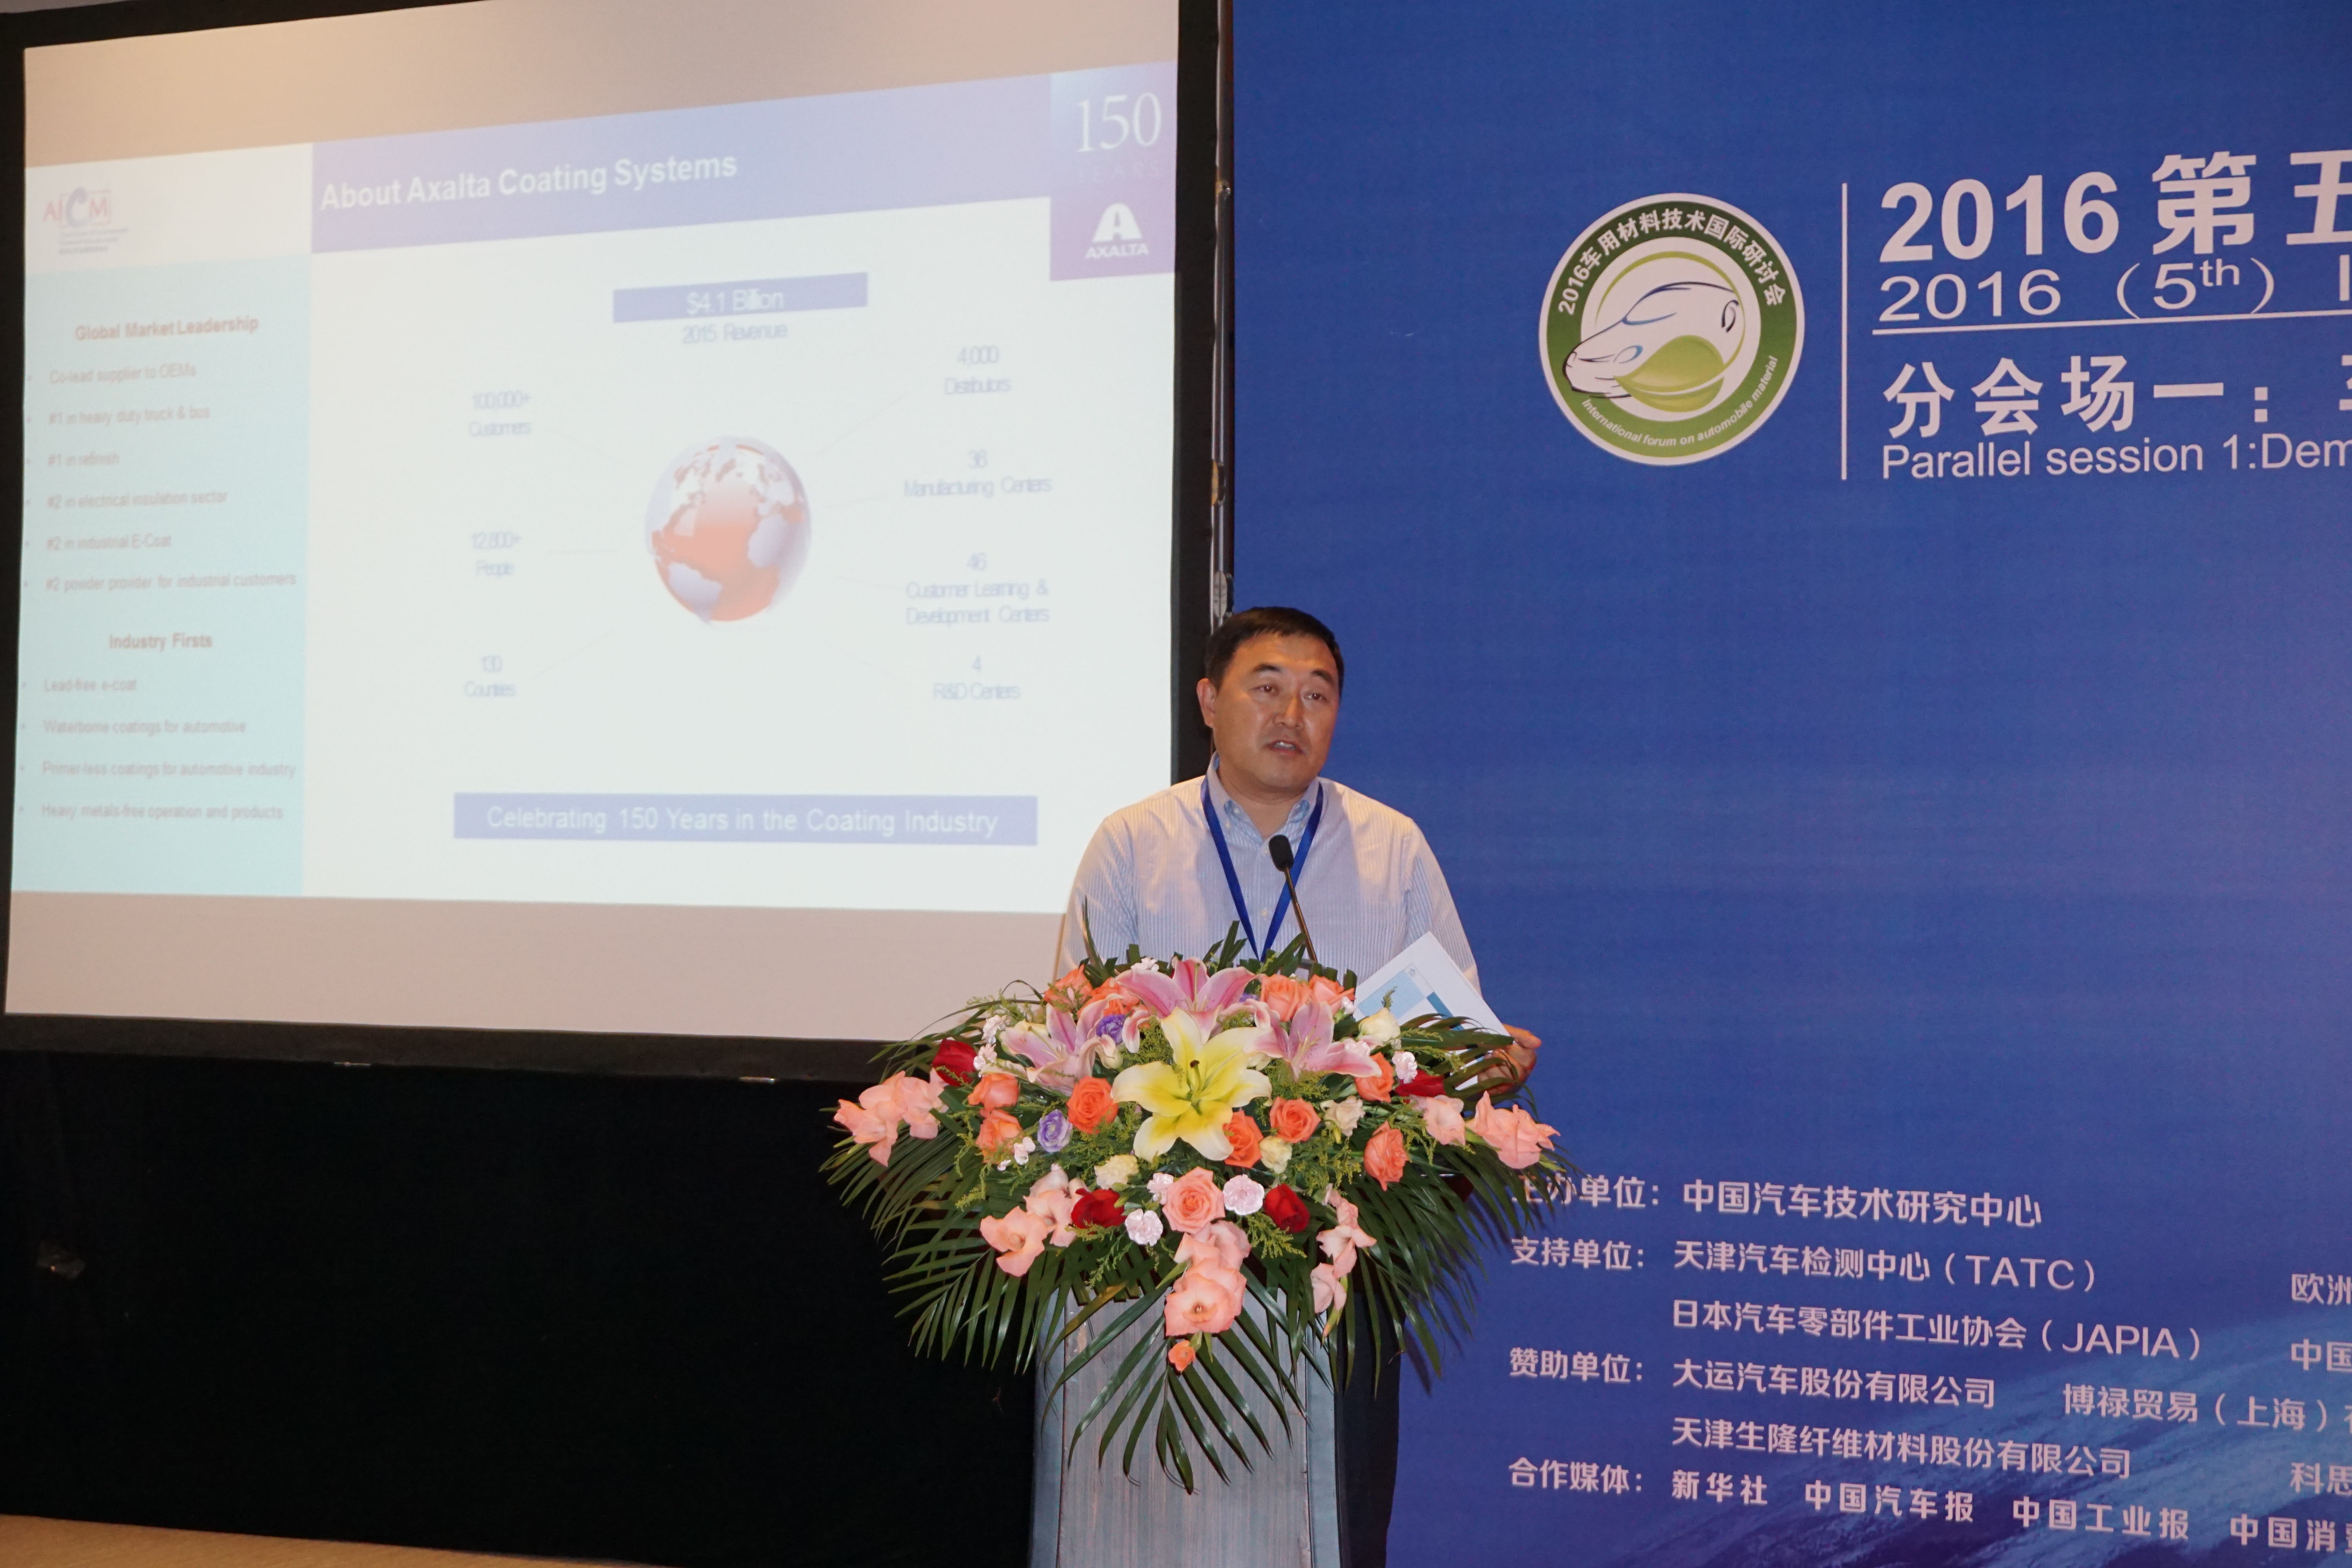 At the 2016 International Forum on Automobile Materials hosted by the China Automotive Technology & Research Center in Beijing, Dr. Fucheng Yan, Product Director, Axalta Greater China explained how Axalta’s latest generation coatings can support the development of lightweight vehicles, as well as reduce the environmental footprint of vehicle manufacture using energy saving technologies and non-hazardous materials.